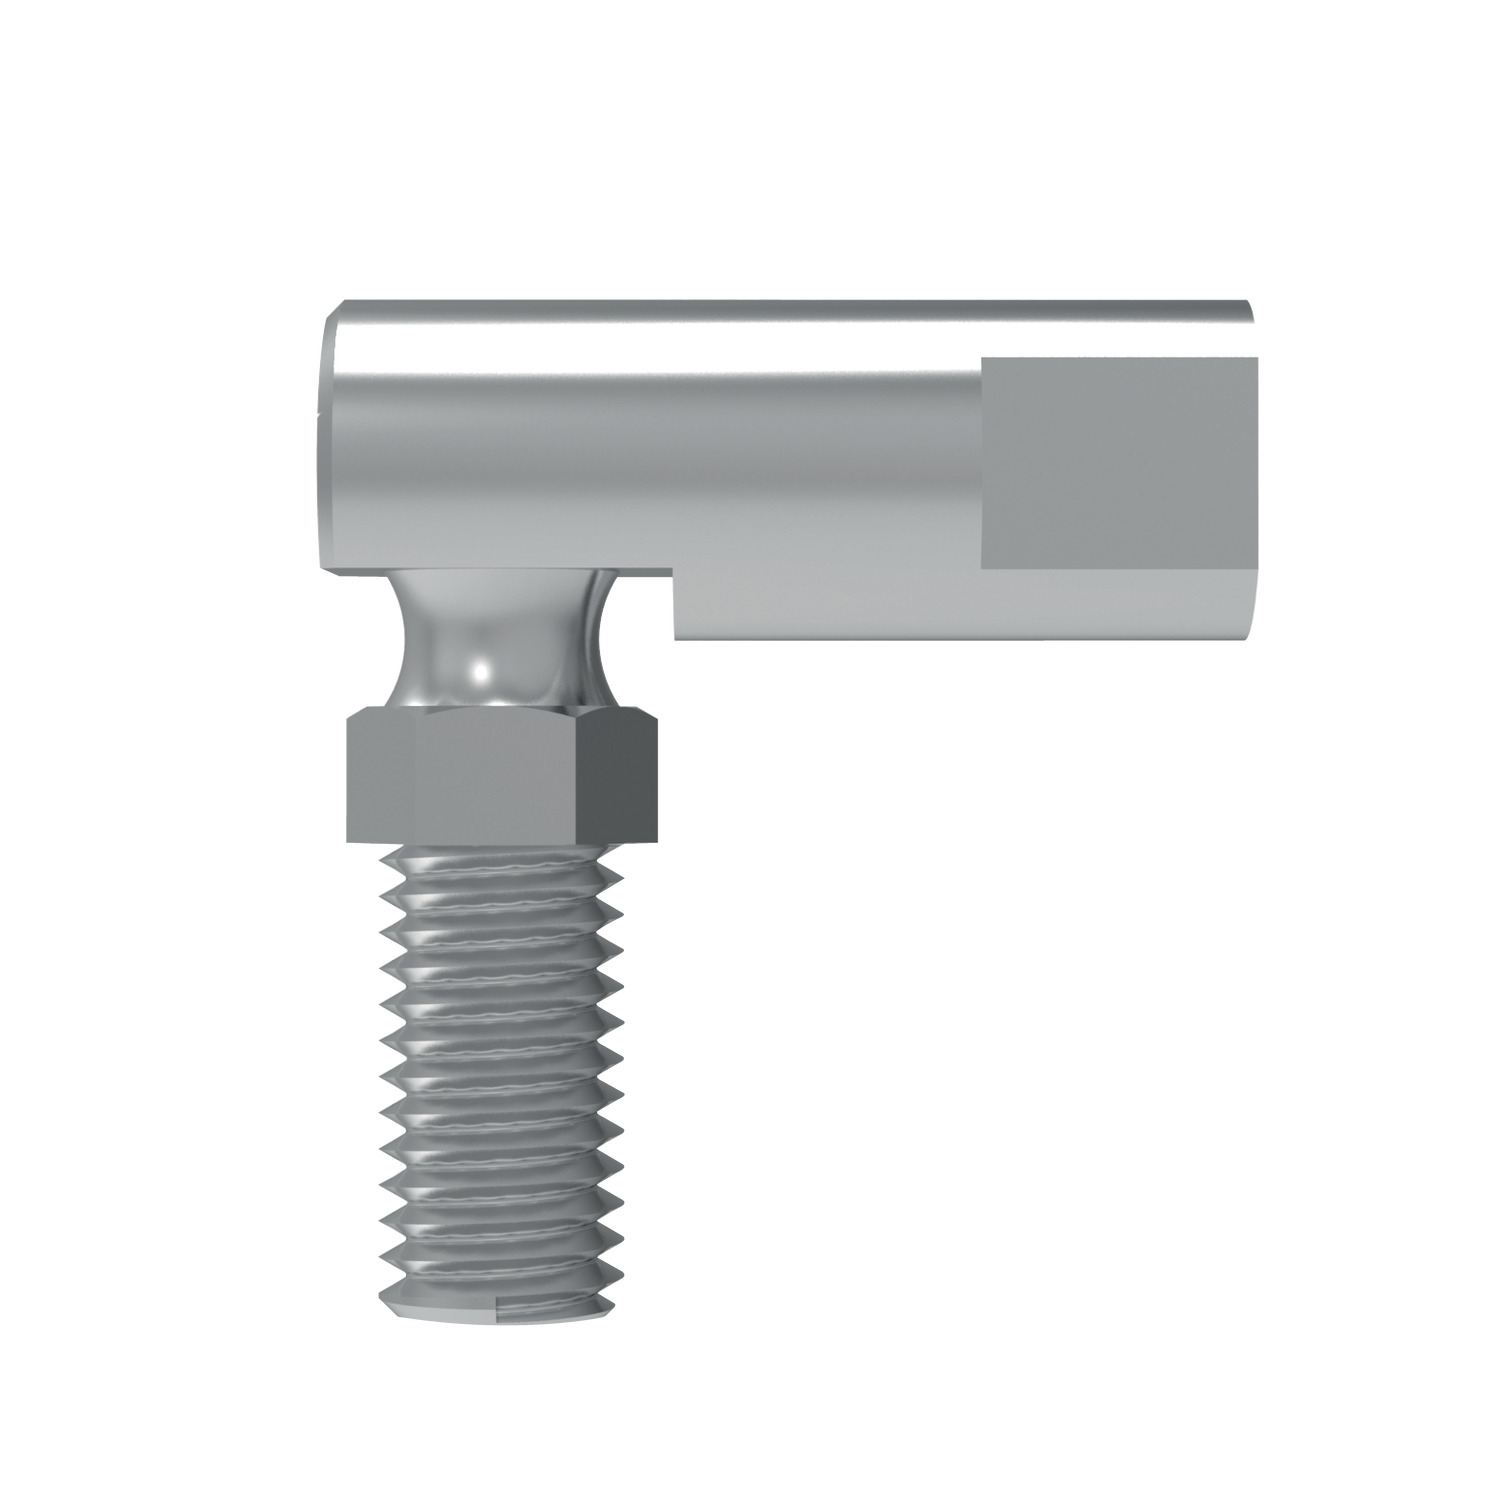 R3532 - Stainless DMG Ball and Socket Joint